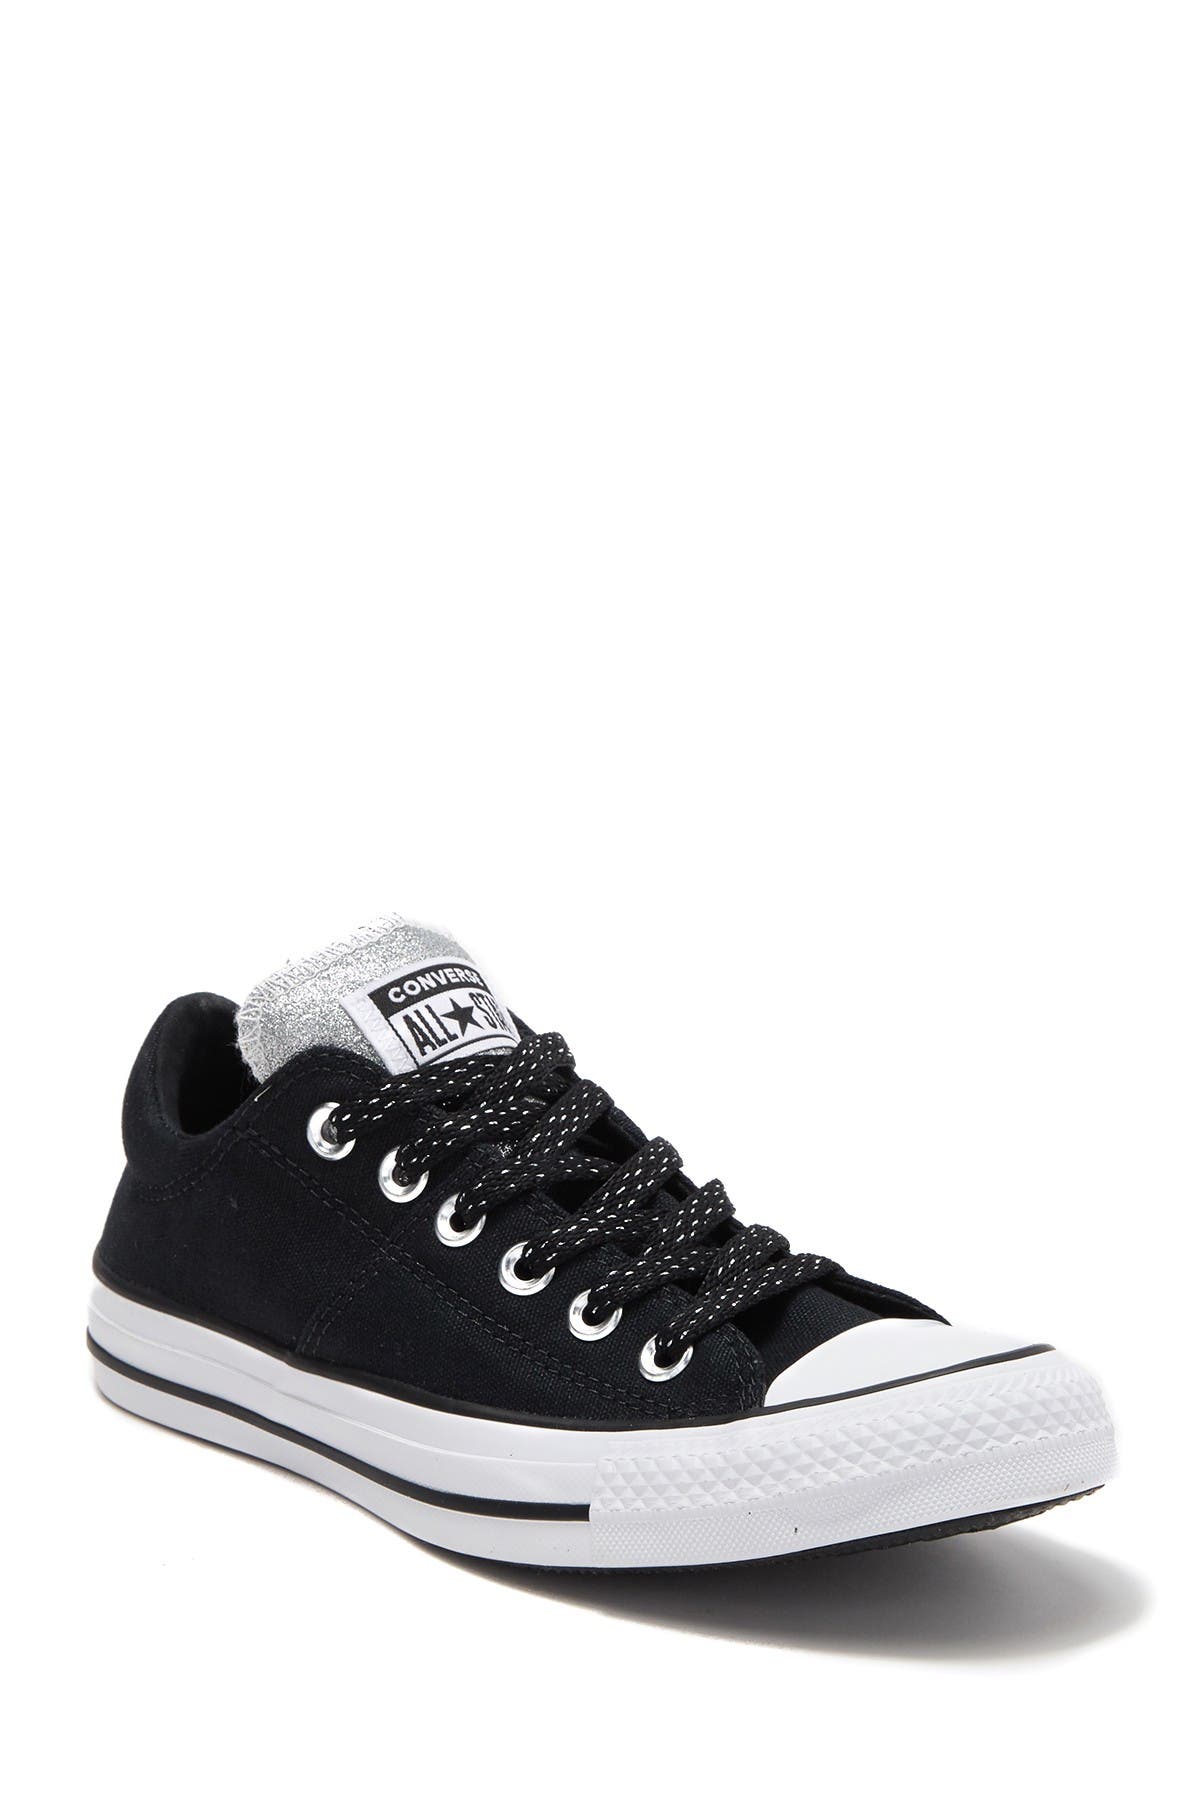 chuck taylor all star madison sneaker